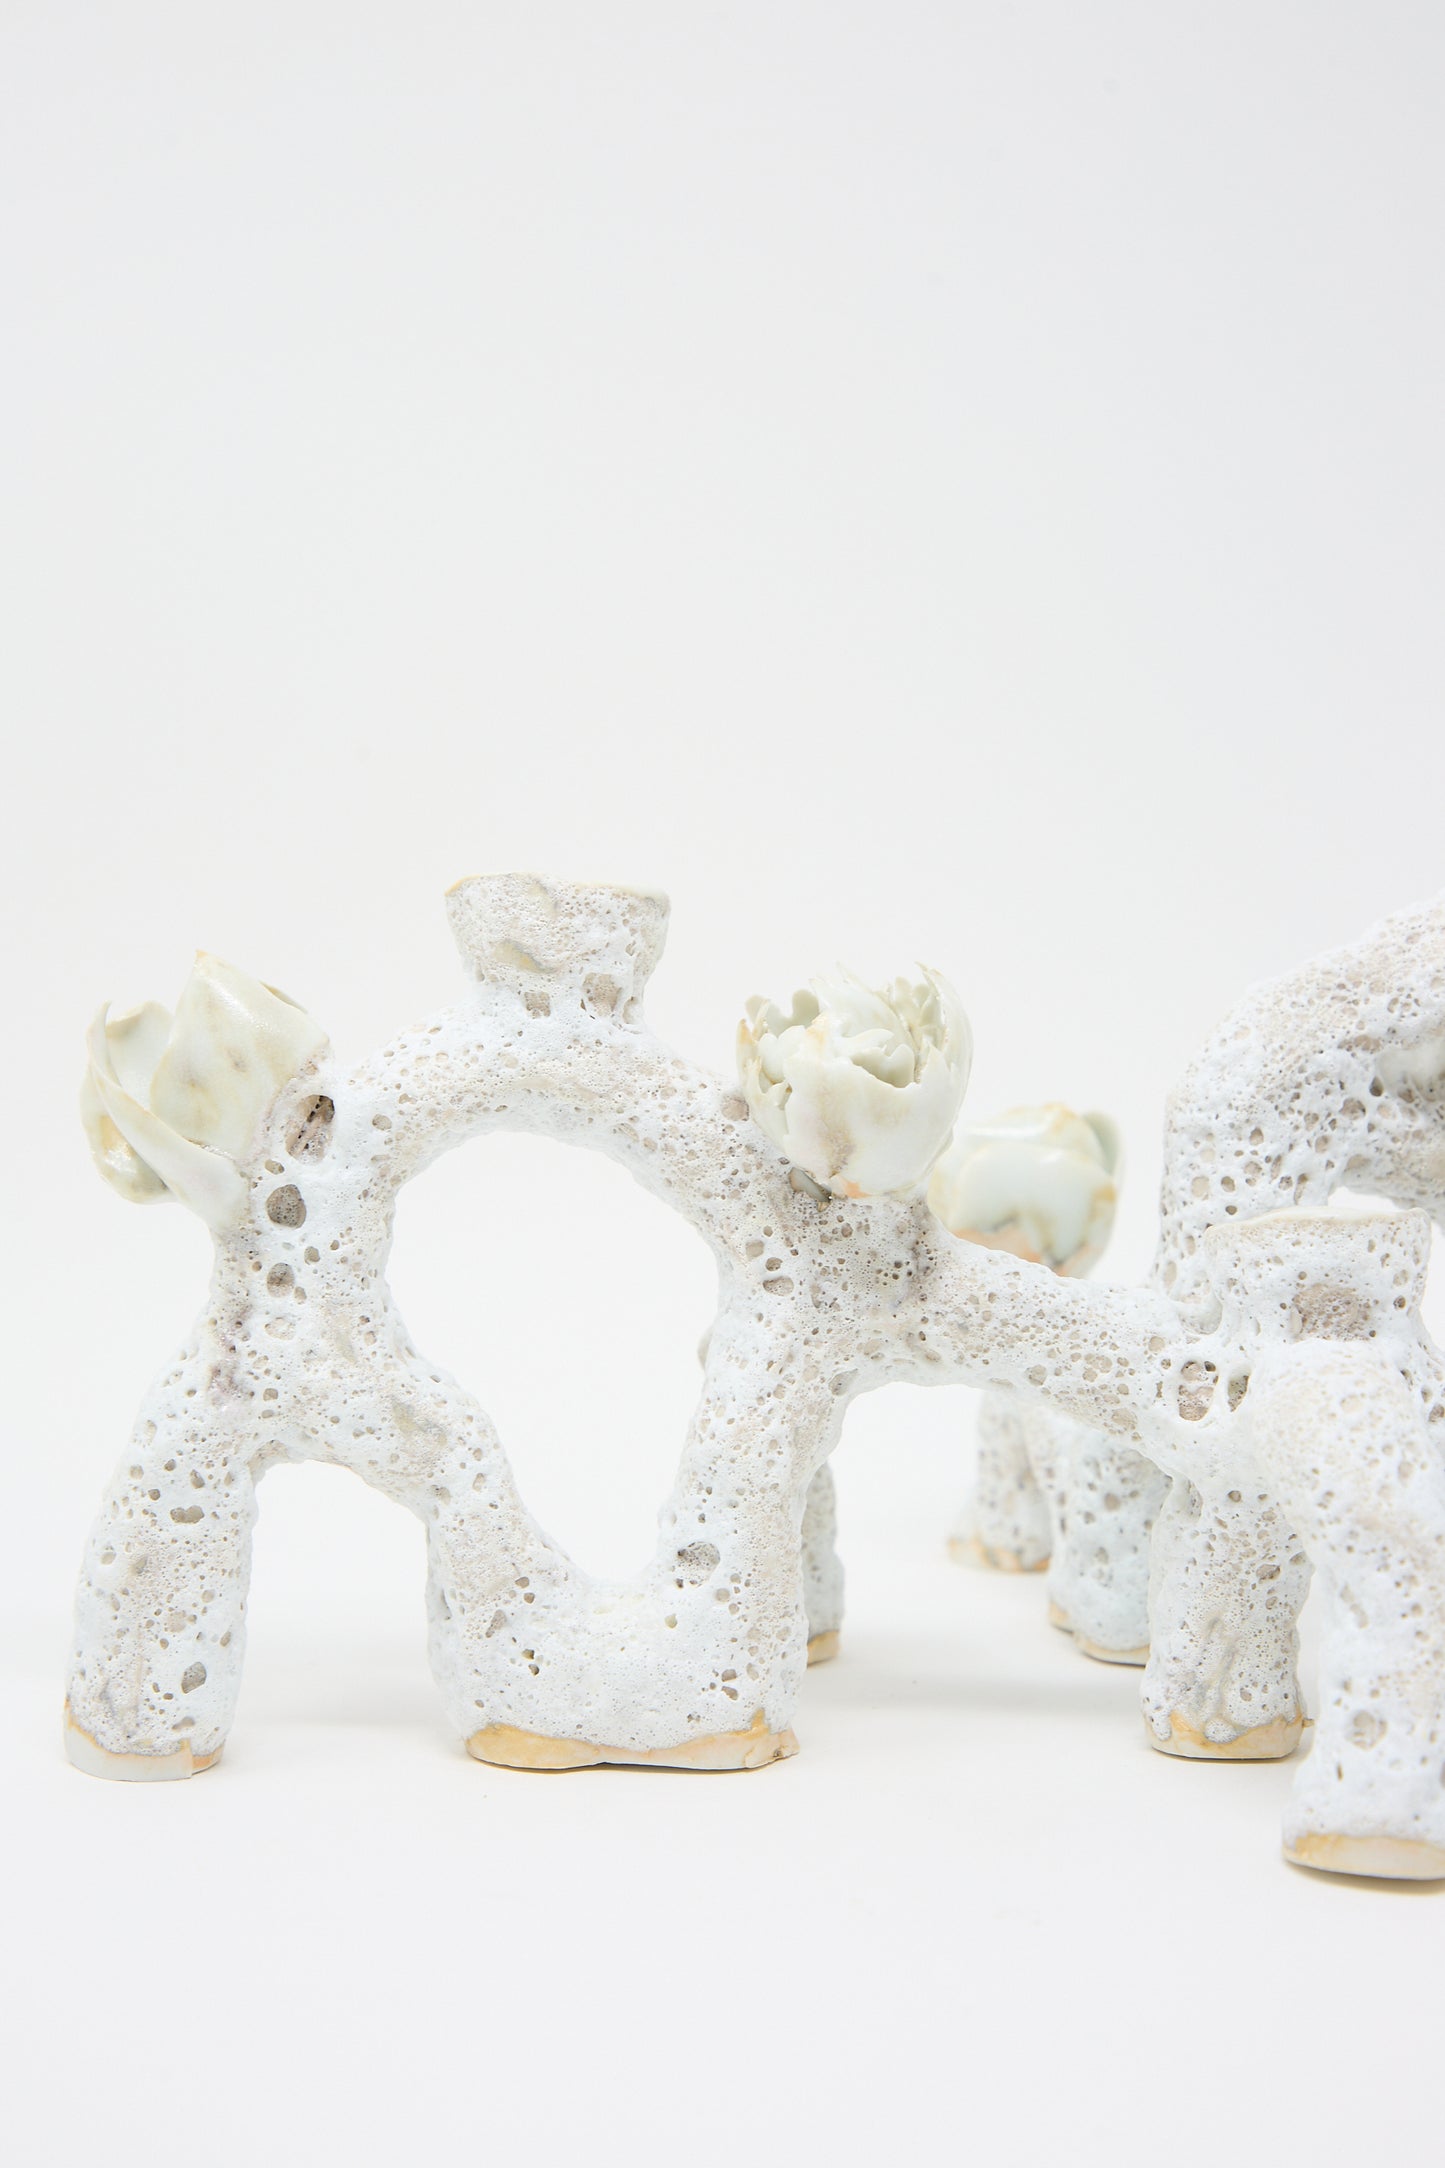 Abstract hand-built ceramic sculpture with a porous, white texture and numerous small arch-like formations. The piece features organic elements resembling flower buds or plant shapes, evoking luminescent petals. This is the Blooming Arches Candle Holder by Dear You.